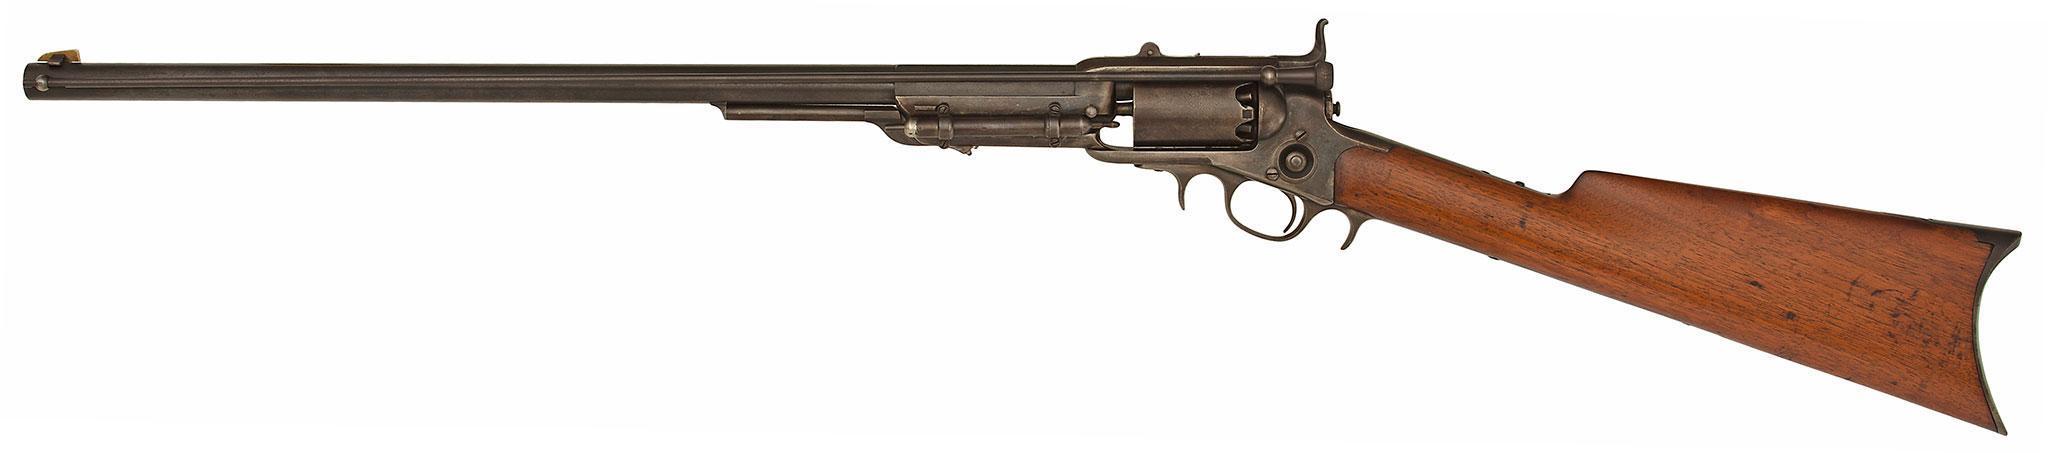 Colt First Model 1855 Percussion Revolving Rifle